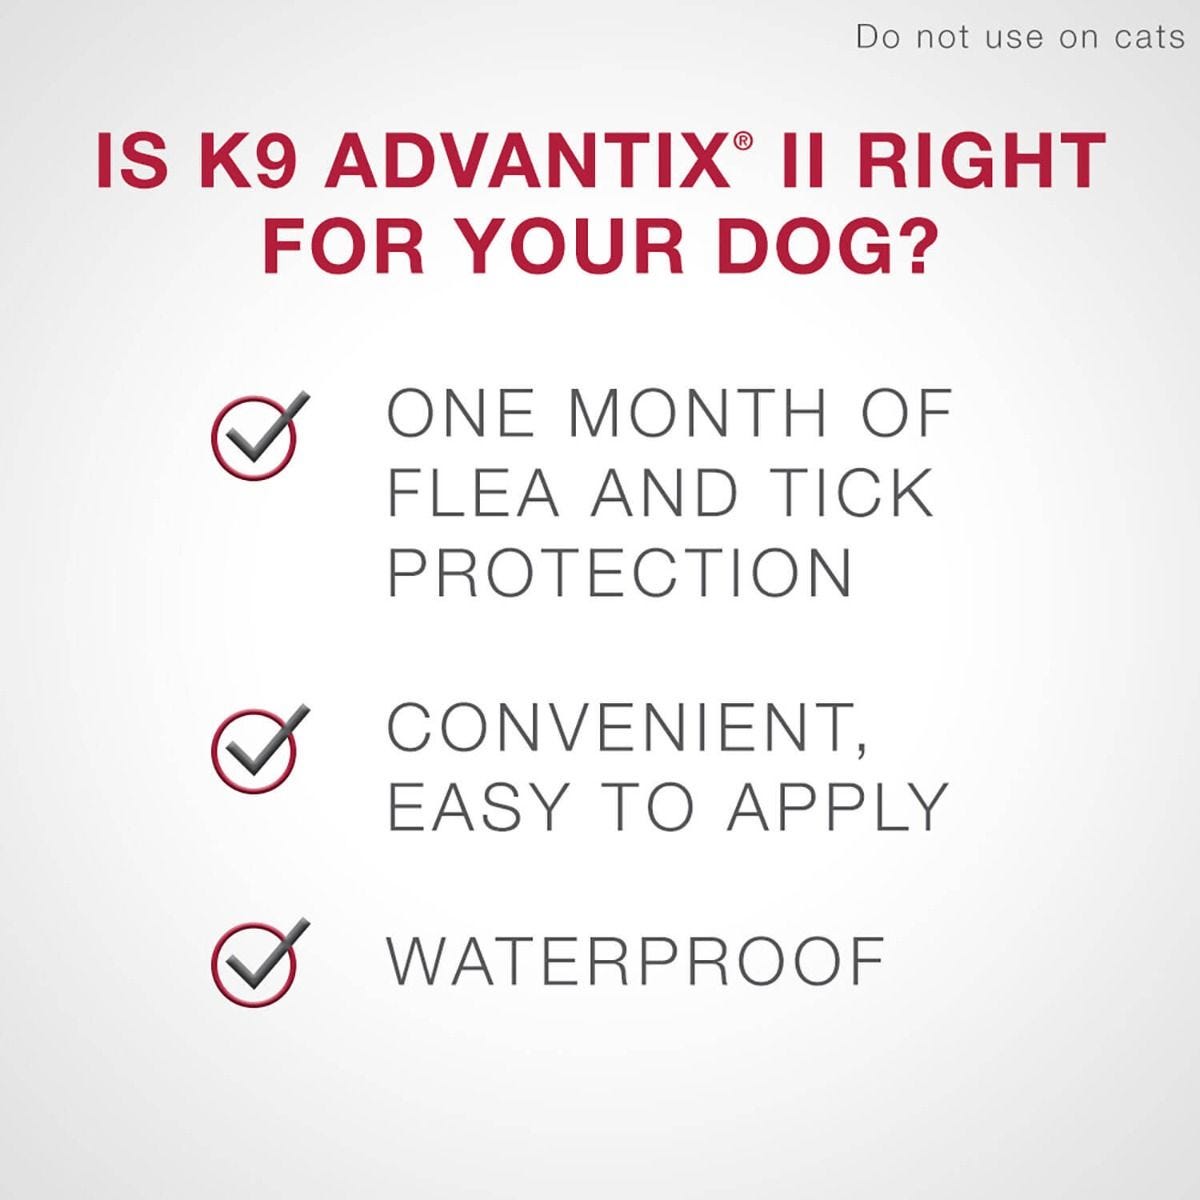 Bayer - K9 Advantix II - Topical Flea and Tick Treatment for Dogs (For Dogs Over 25kg)-ARMOR THE POOCH